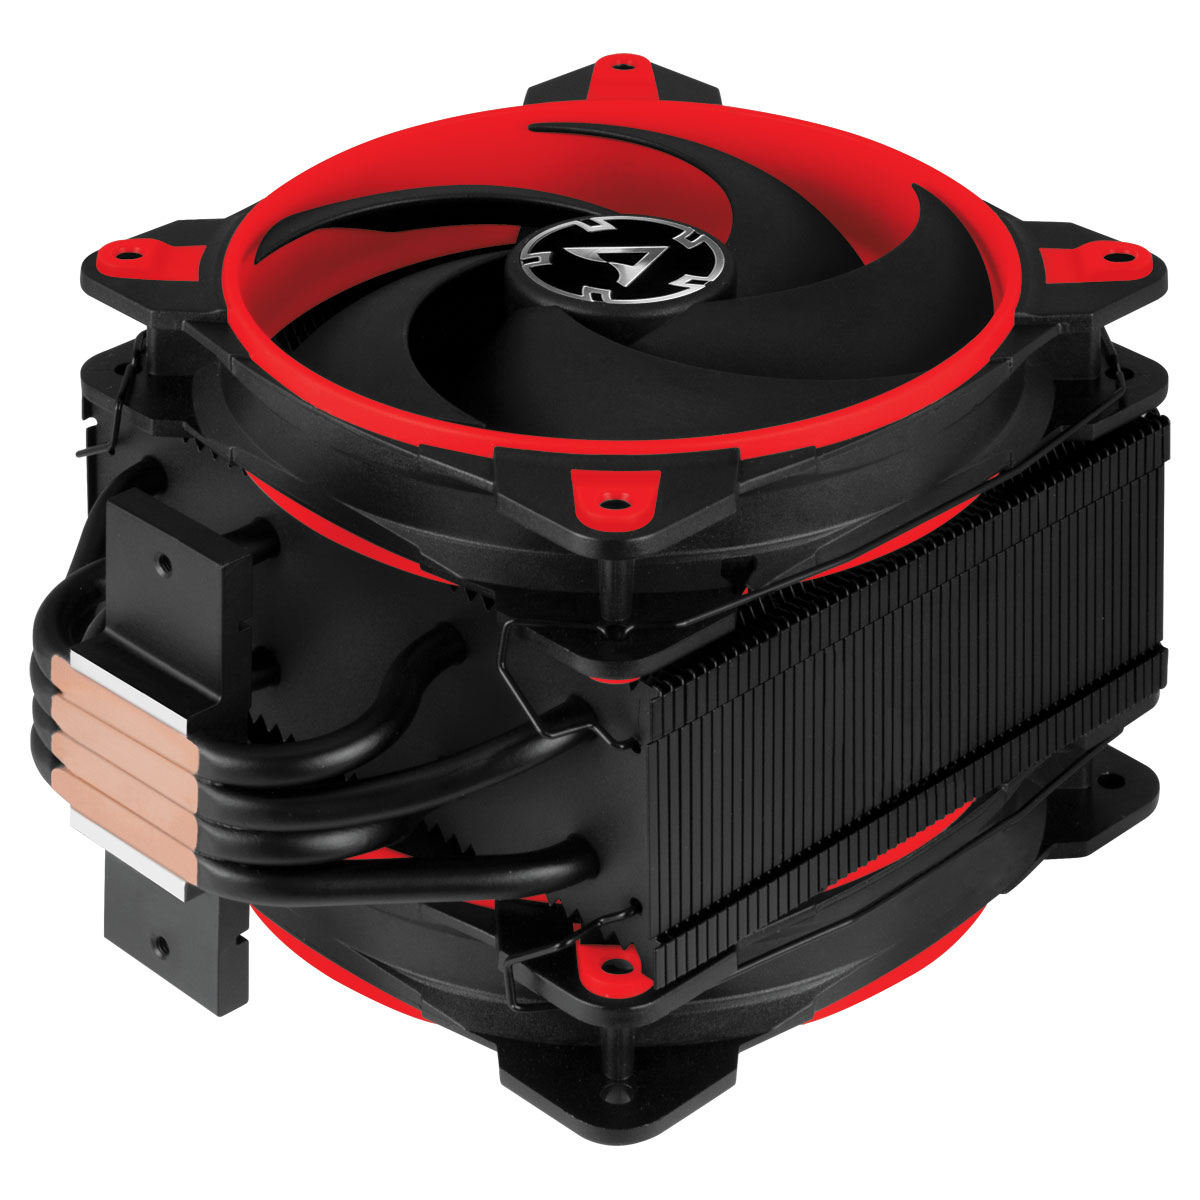 Tower CPU Cooler with Push-Pull Configuration ARCTIC Freezer 34 eSports DUO (Red) Detail View Direct Touch Heatpipes